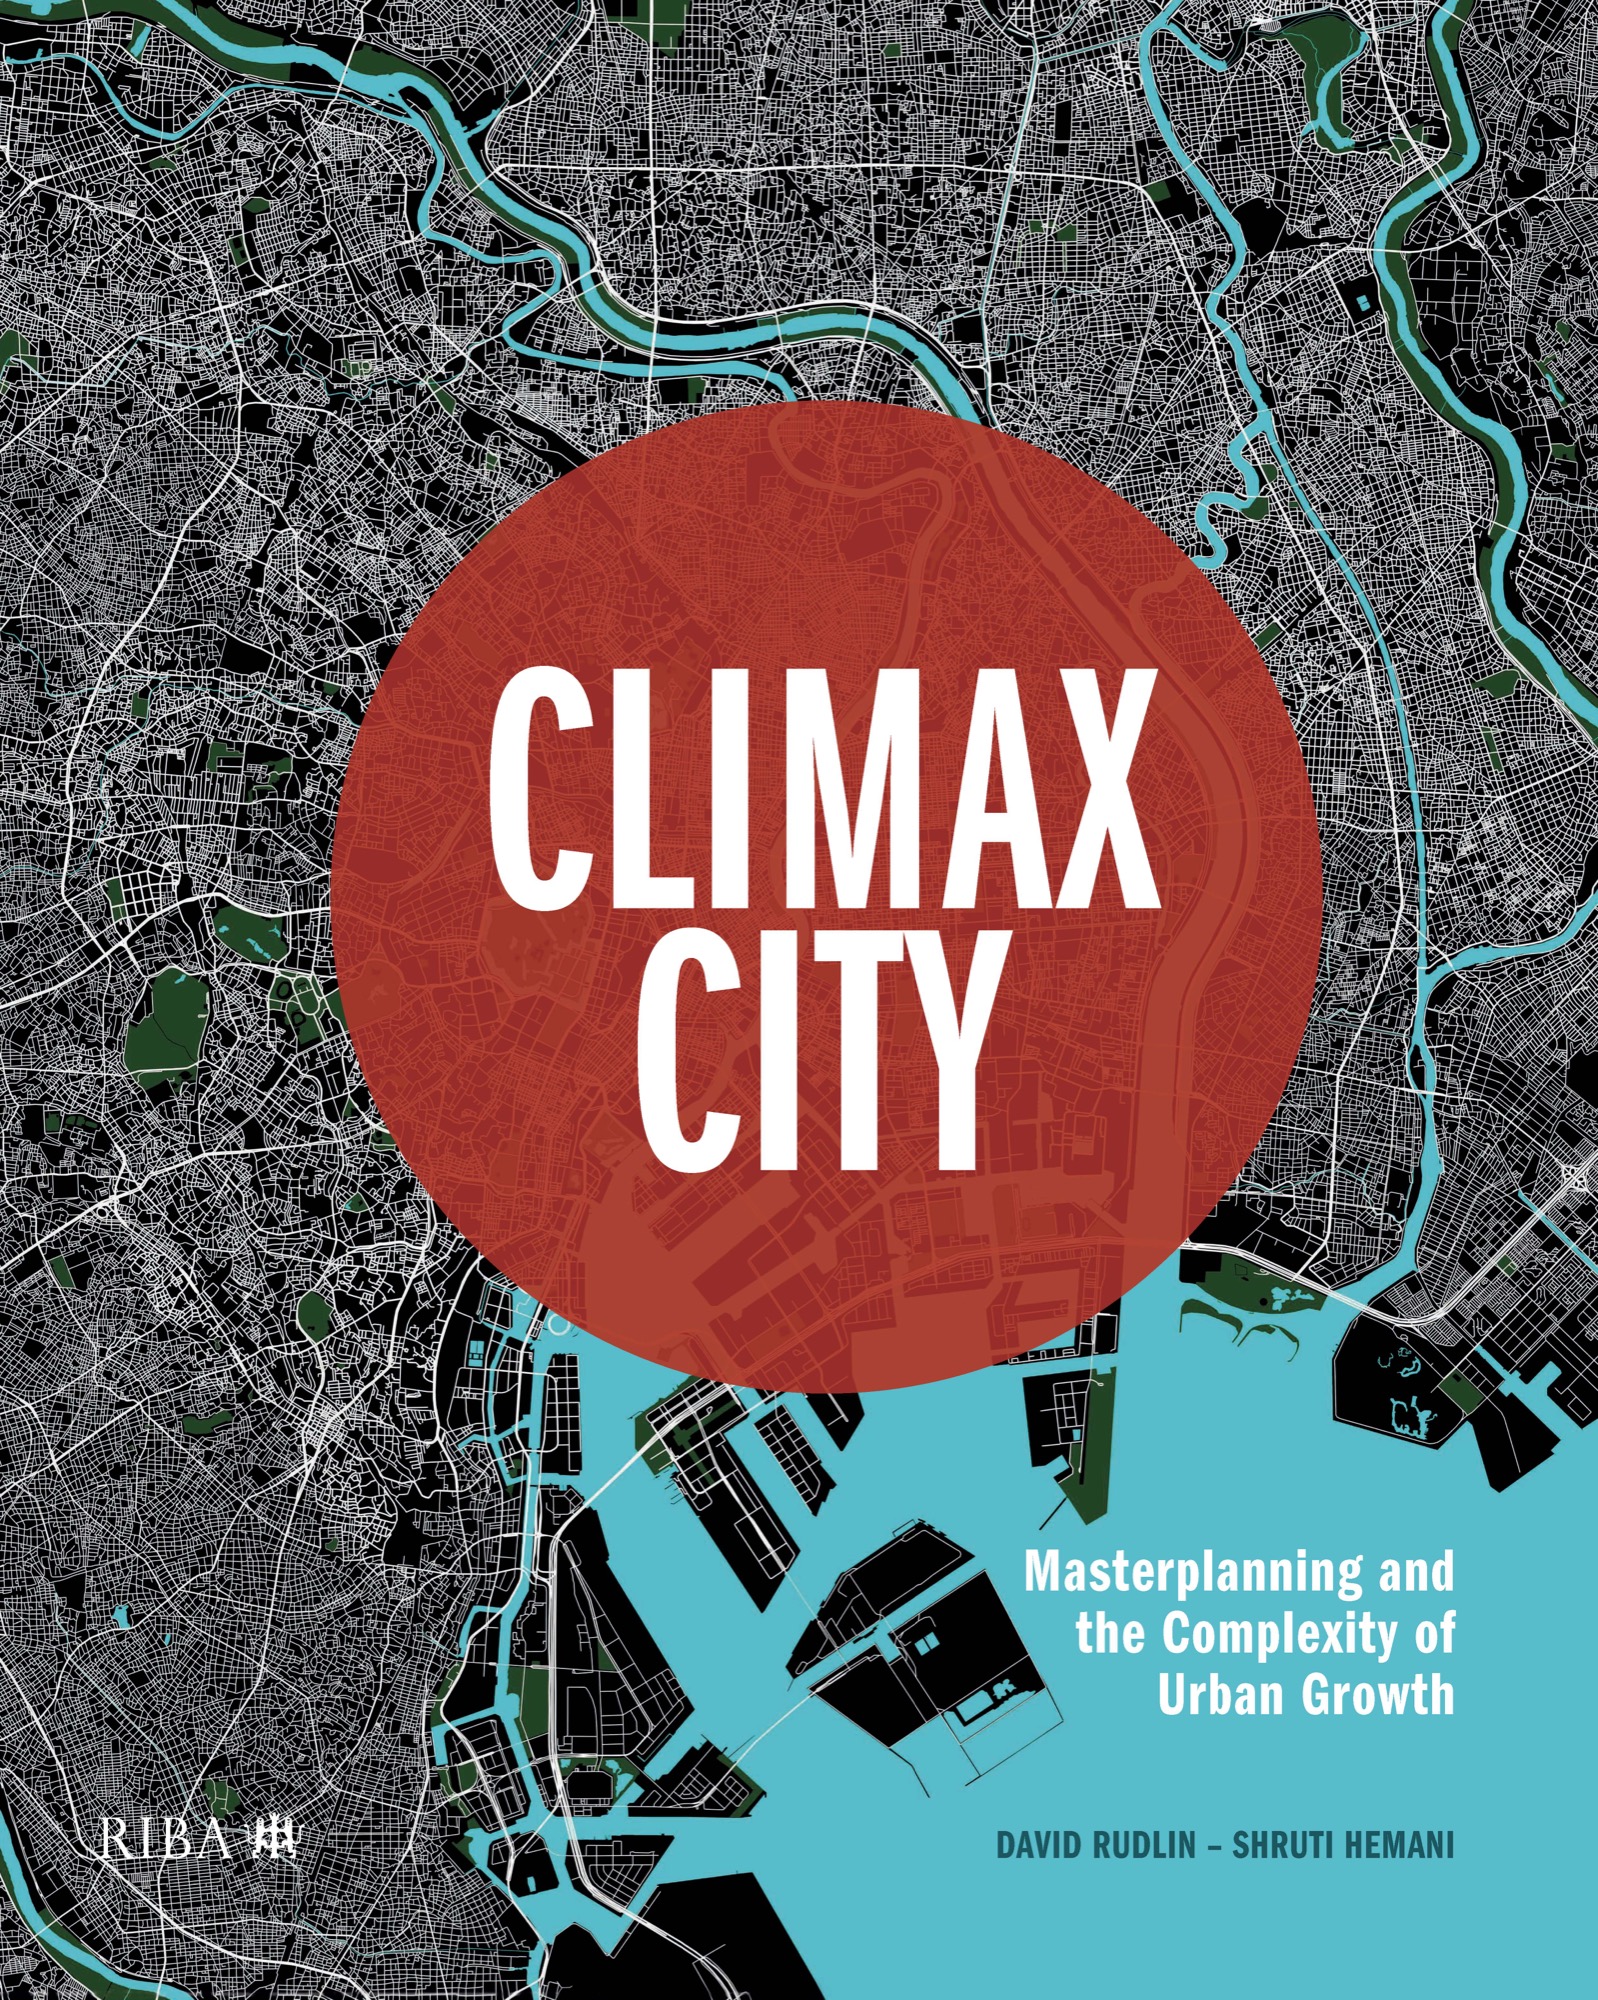 Book: CLIMAX CITY - Masterplanning and the Complexity of Urban Growth, authored by David Rudlin and Shruti Hemani 1